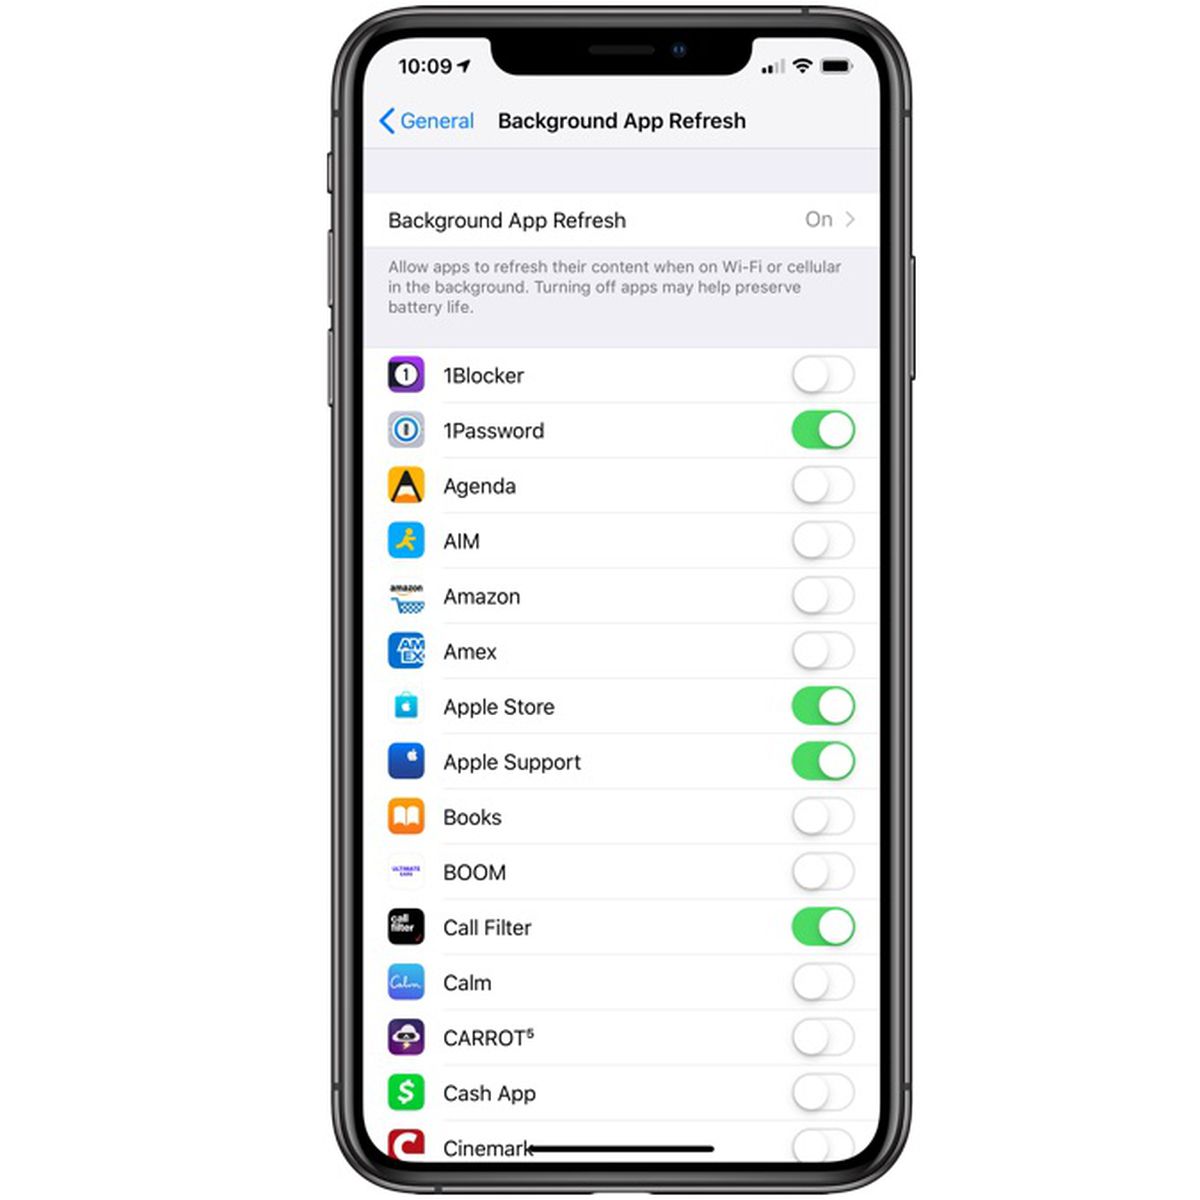 Apps Are Using Background App Refresh to Send Data to Tracking Companies -  MacRumors